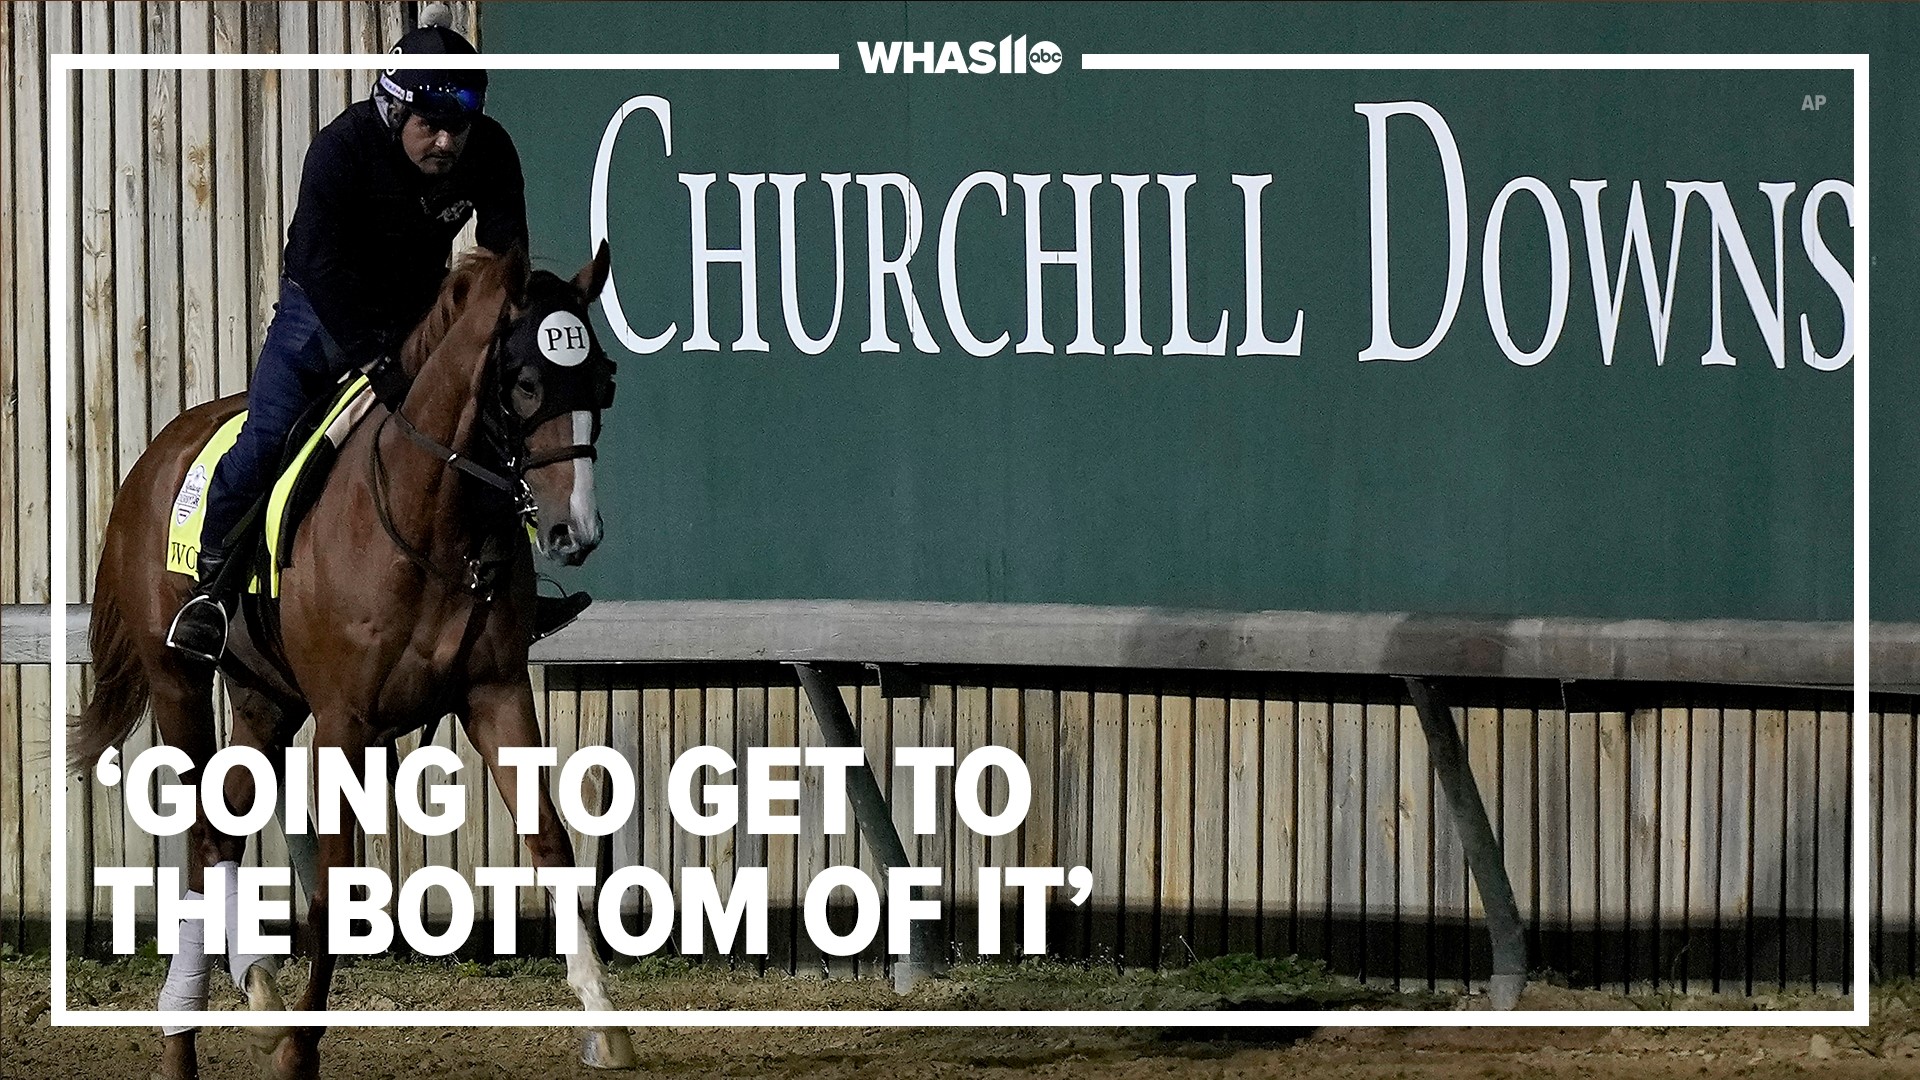 Churchill Downs is finishing their racing season at Ellis Park out of an abundance of caution following the recent deaths of horses at their facility.